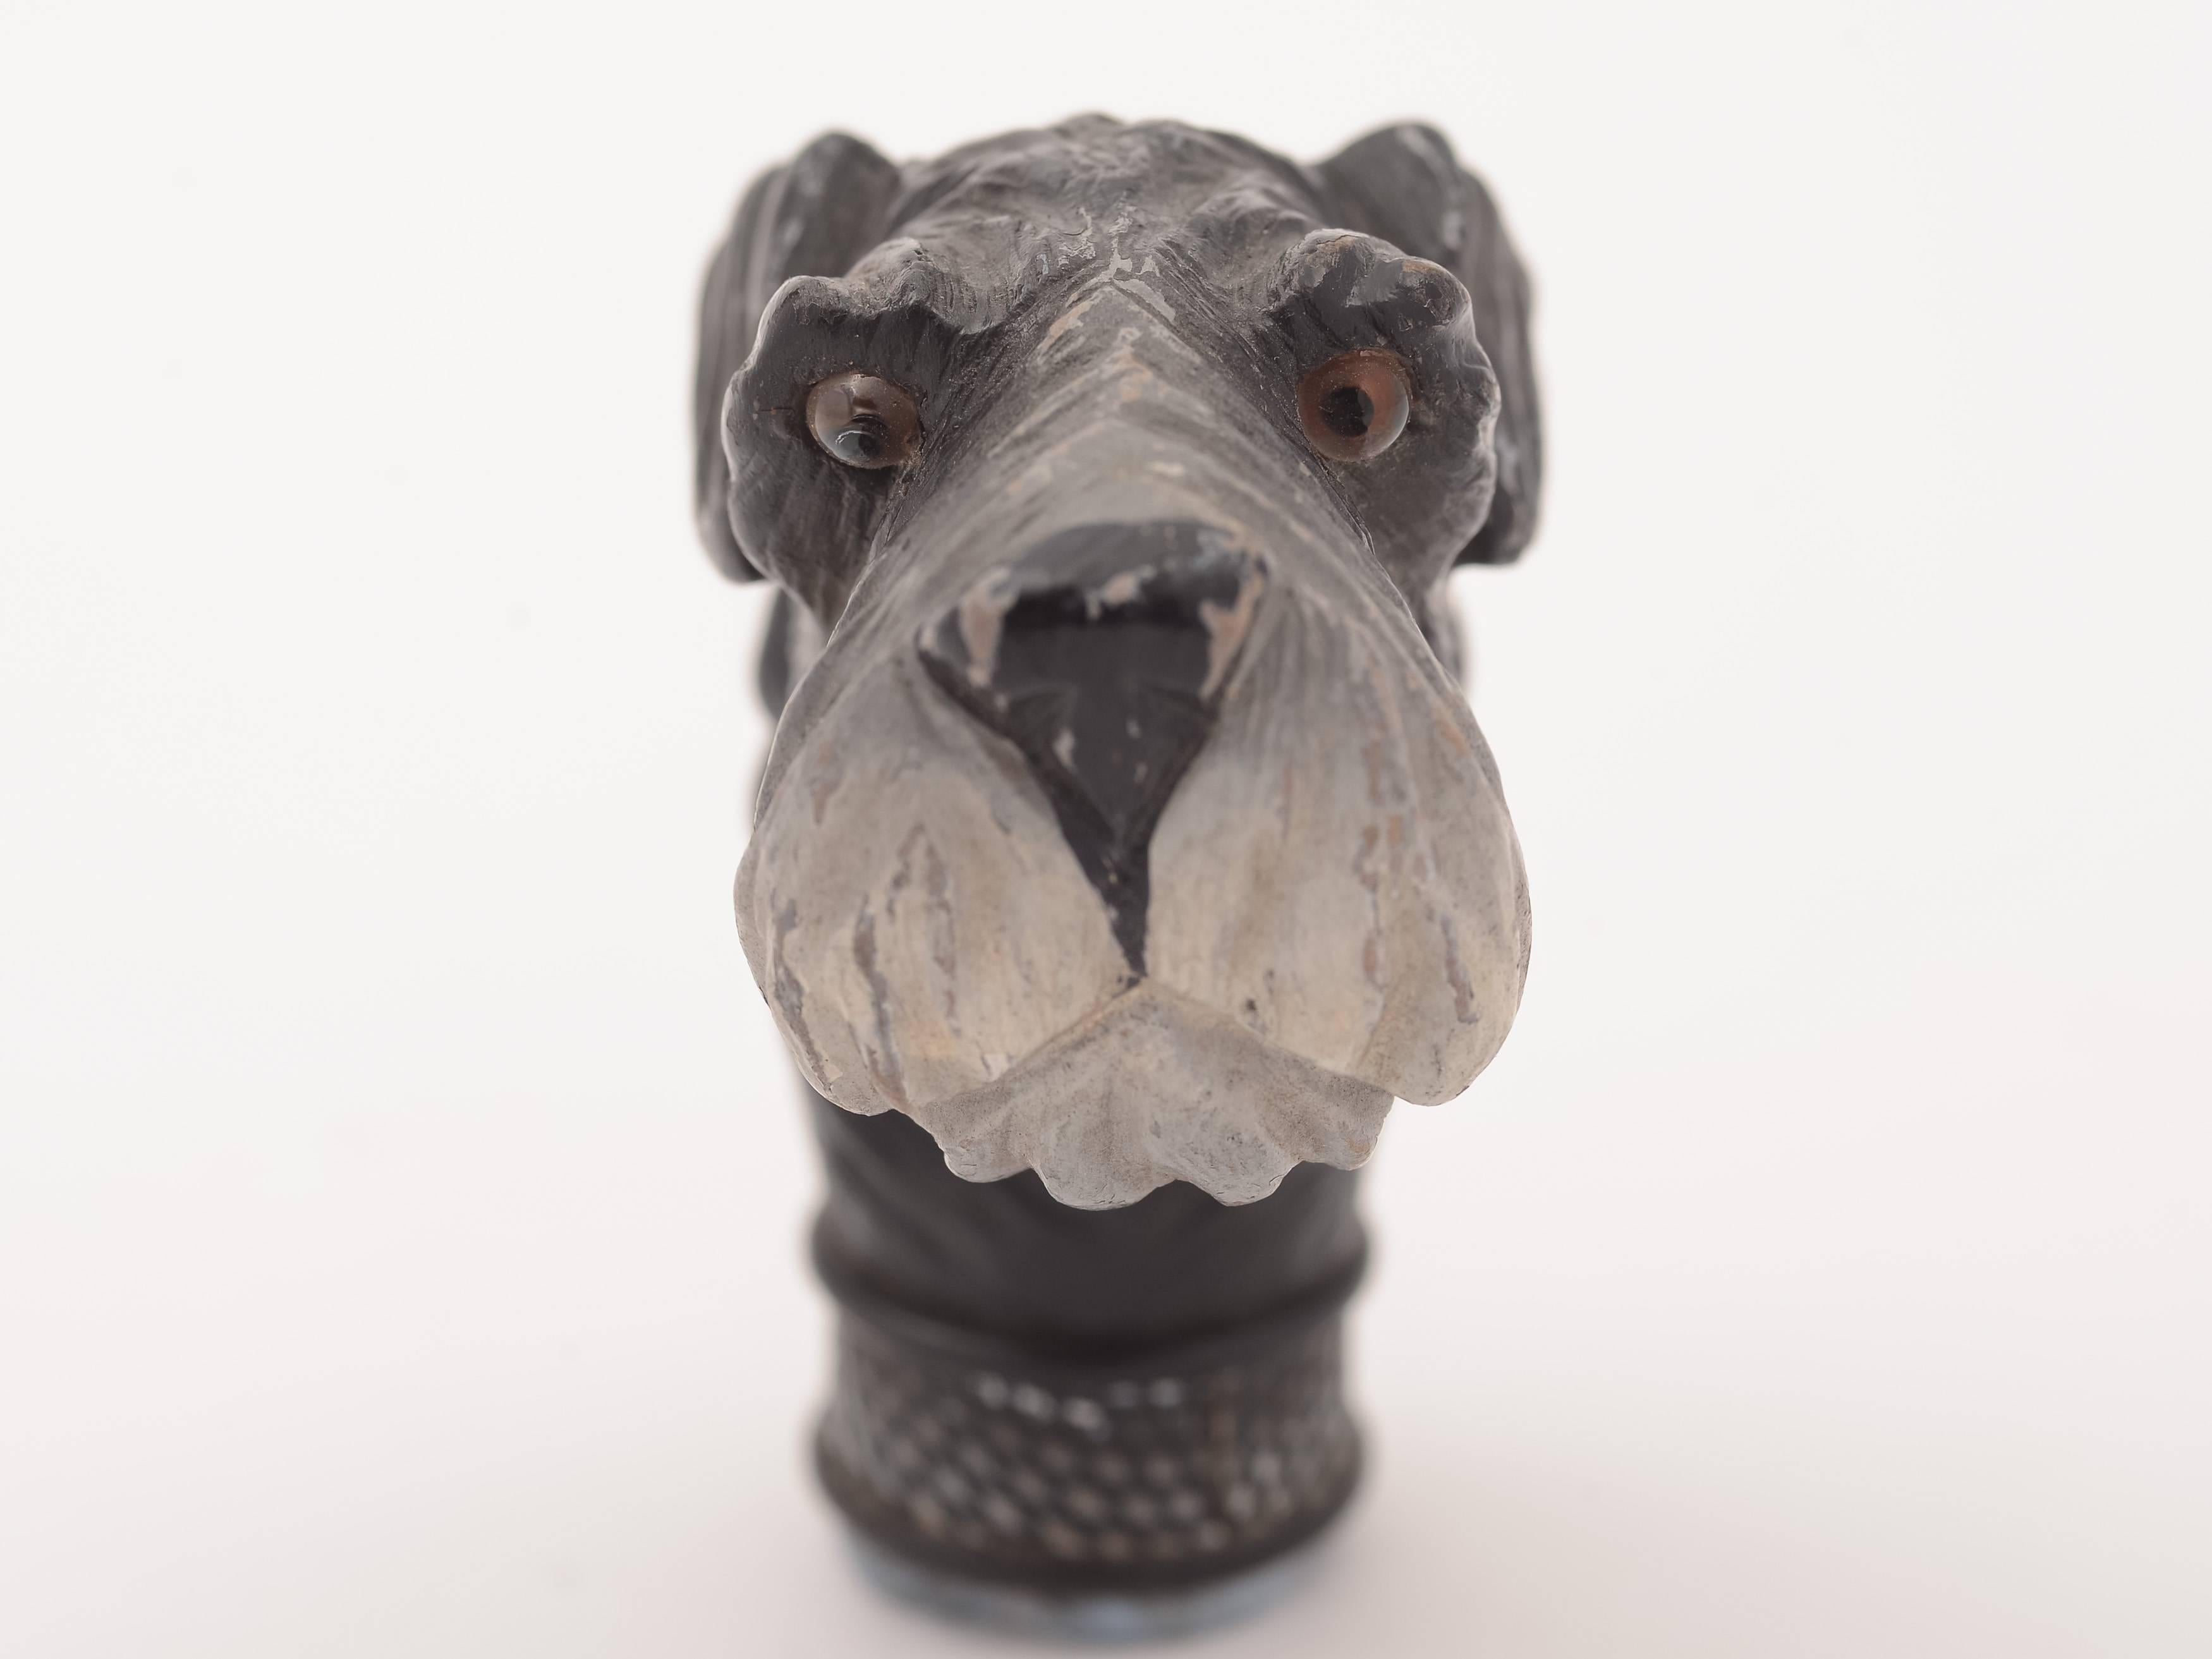 A lovely European carved cane handle in shape of dogs head with glass eyes and painted decoration, circa 1920.



Measurements:
Height: 3